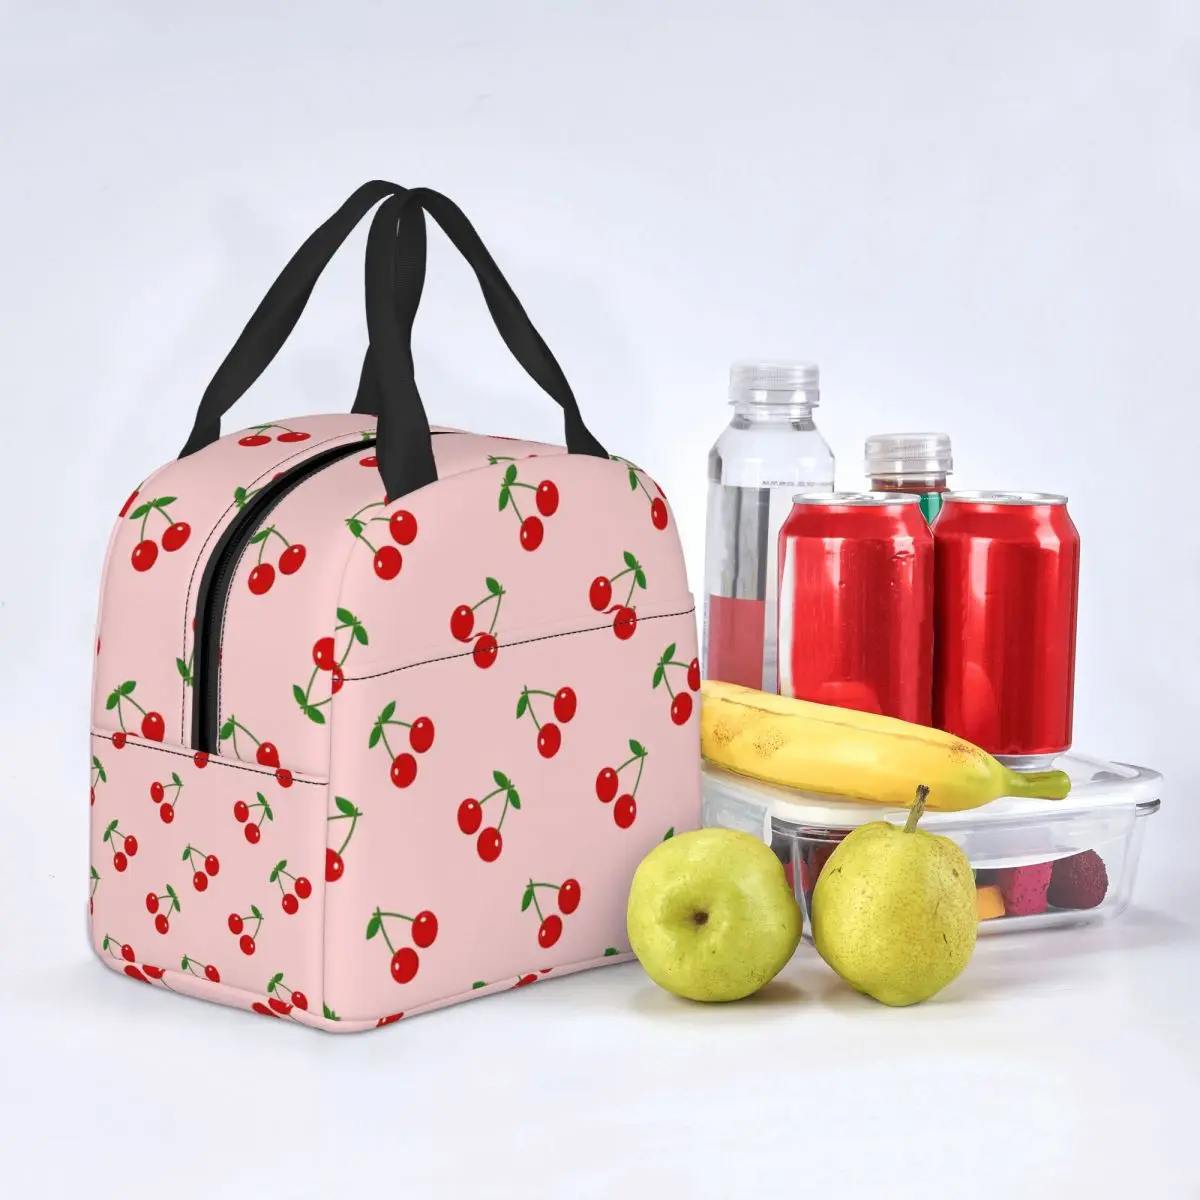 Lunch Bags for Men Women Cherry Insulated Cooler Portable Picnic Cute Fruit Canvas Tote Food Bag